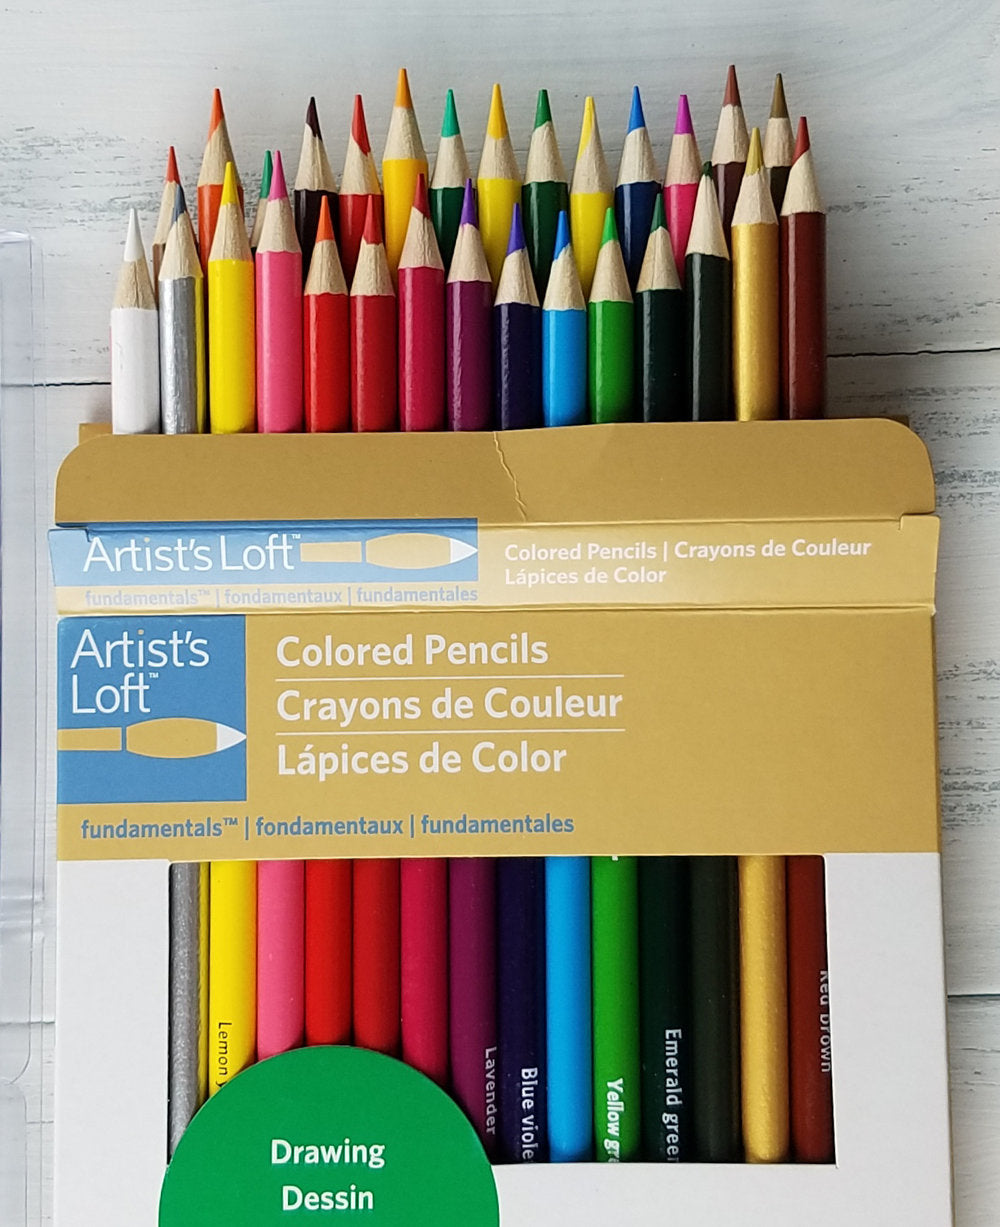 The Top 5 Inexpensive Colored Pencils for the Non-Artist – Samantha B Design